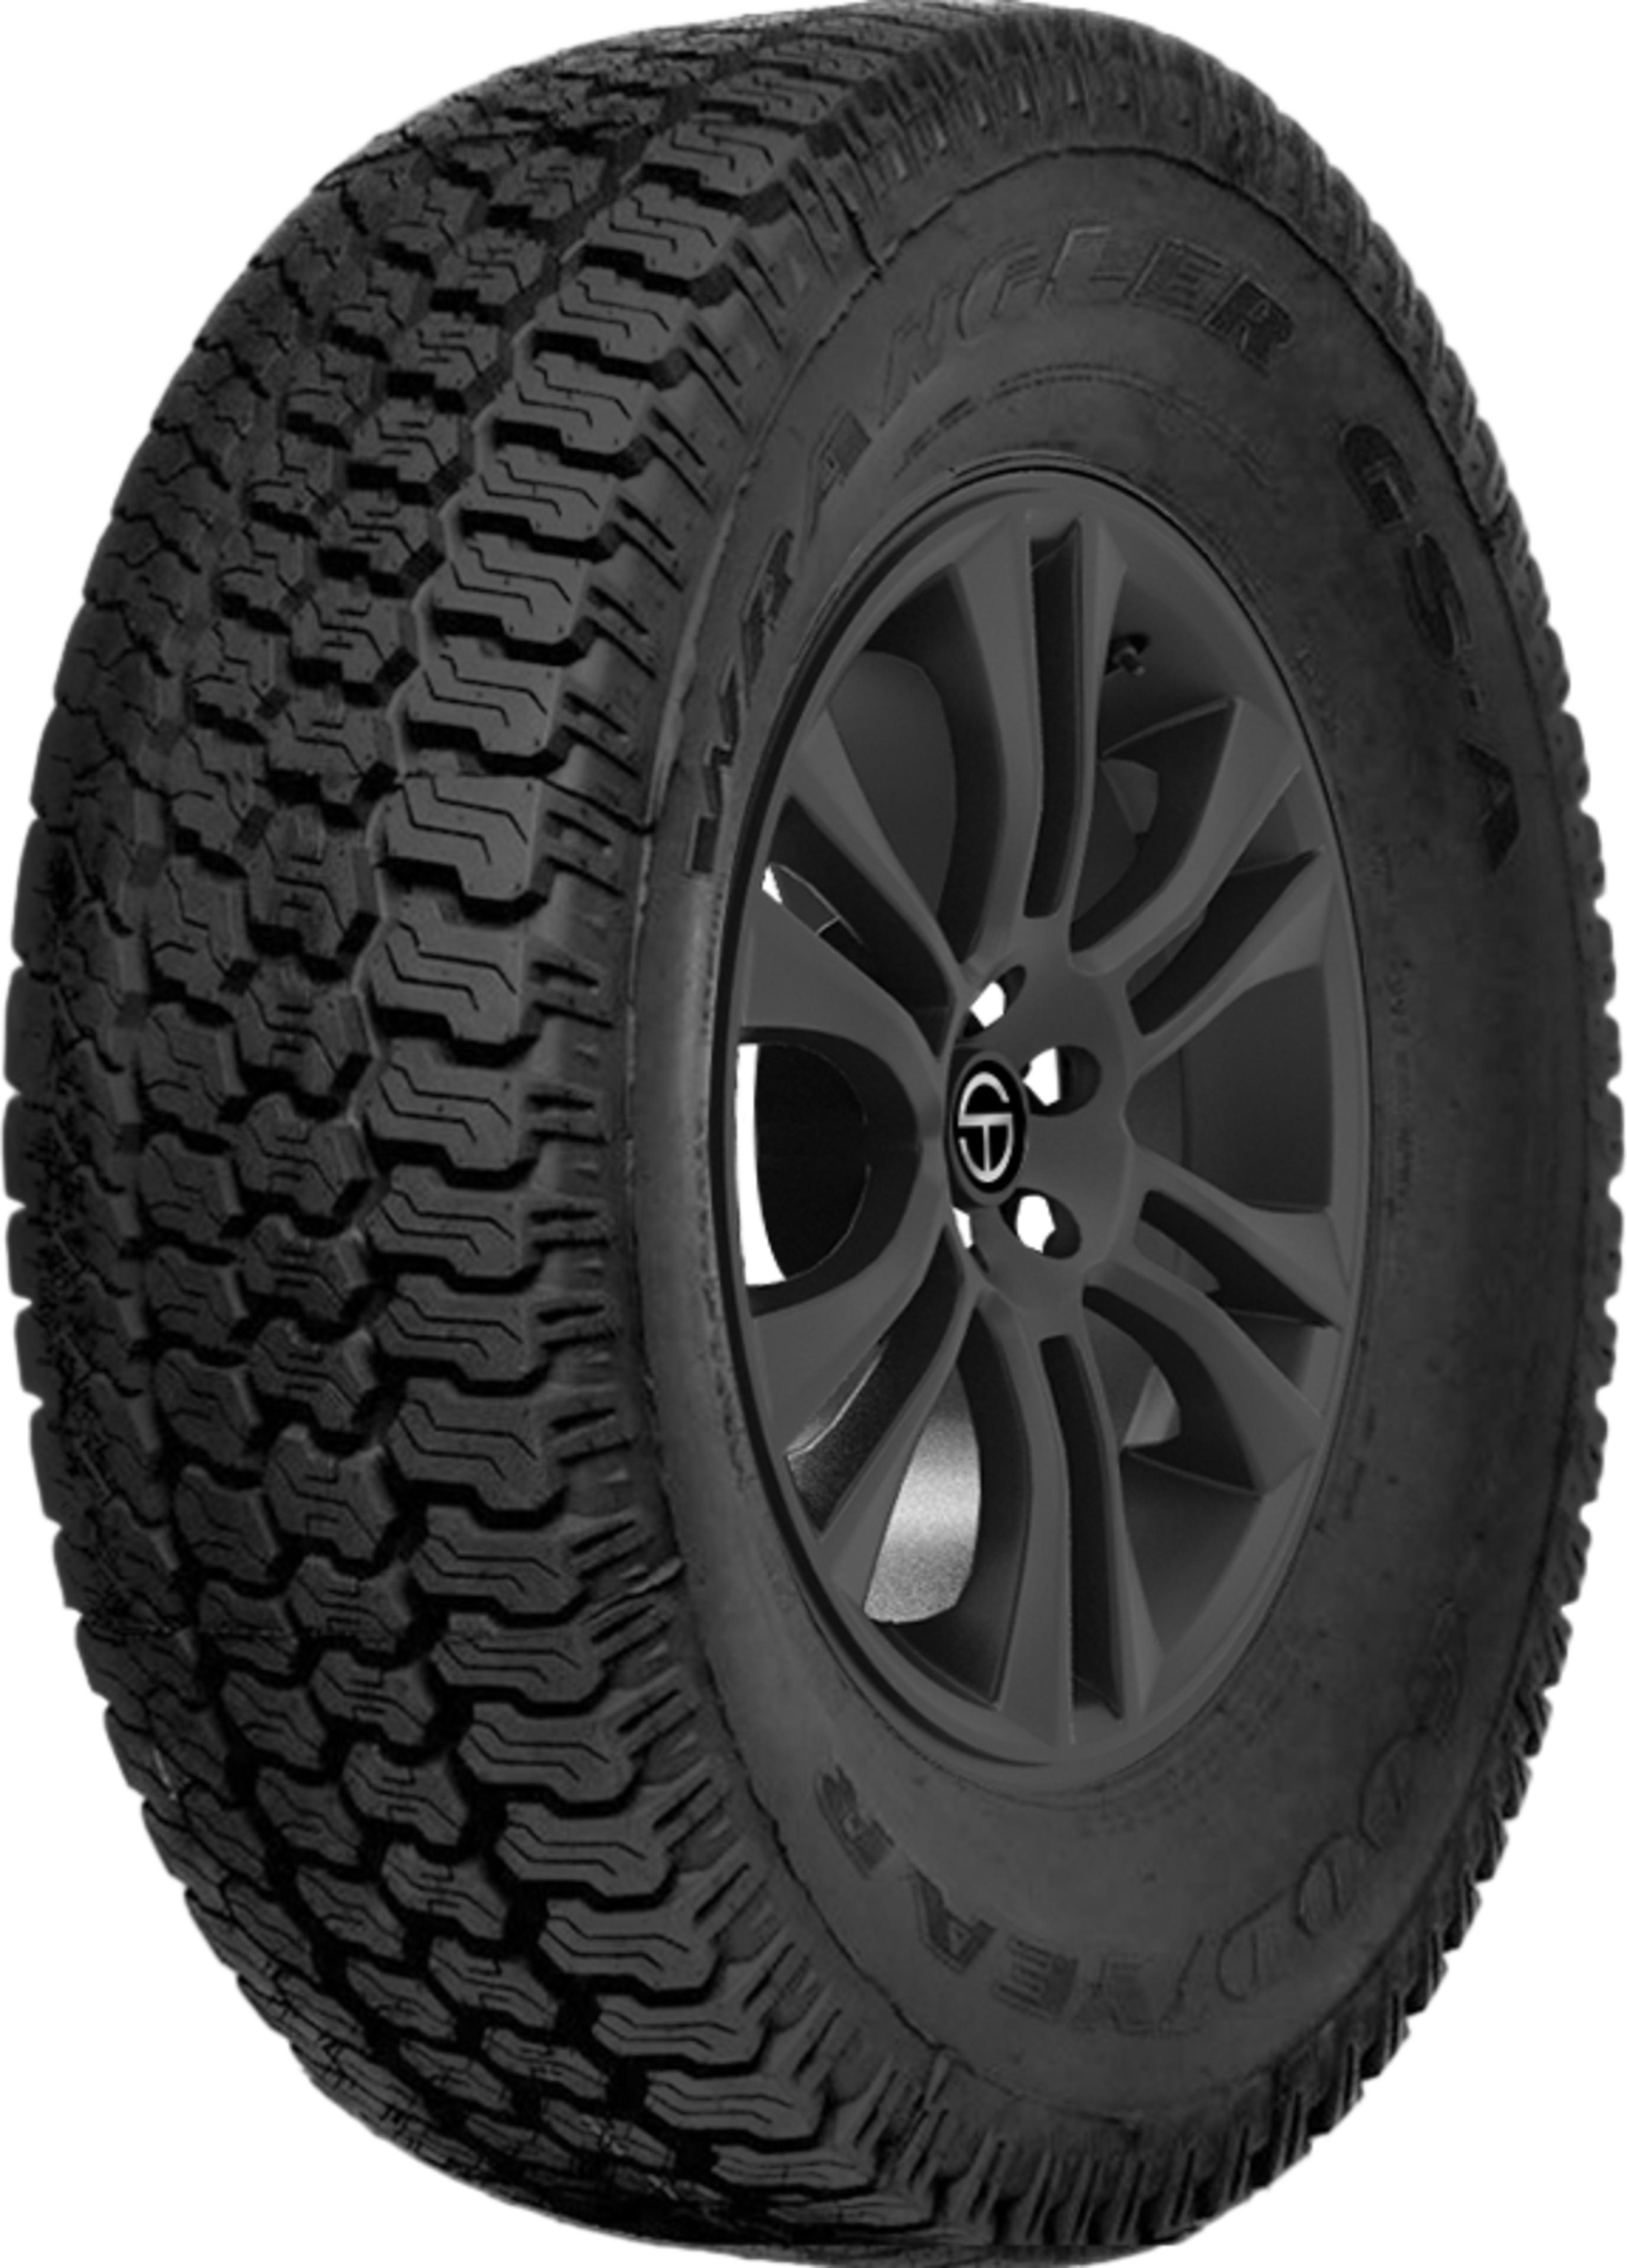 Buy Goodyear Wrangler GS-A Tires Online | SimpleTire